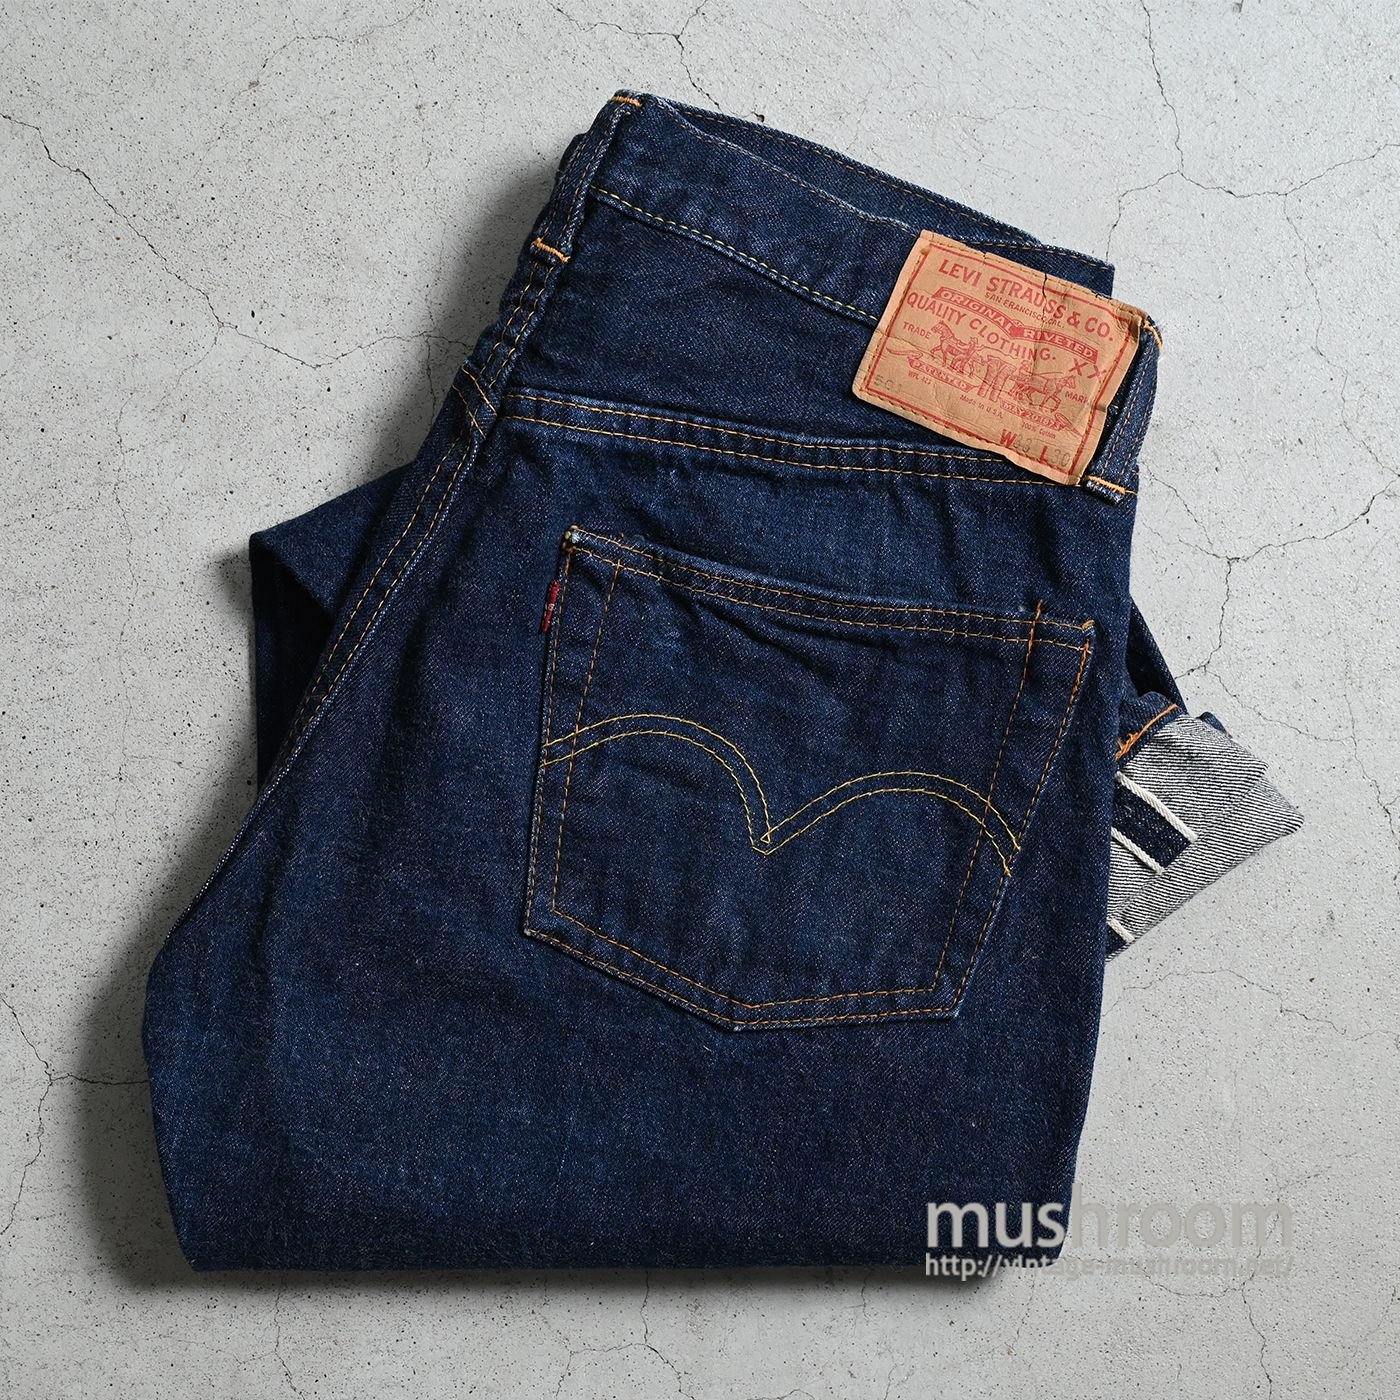 LEVI'S 501 BIGE JEANS（Early Type/MINT CONDITION/W33L30） - 古着屋 